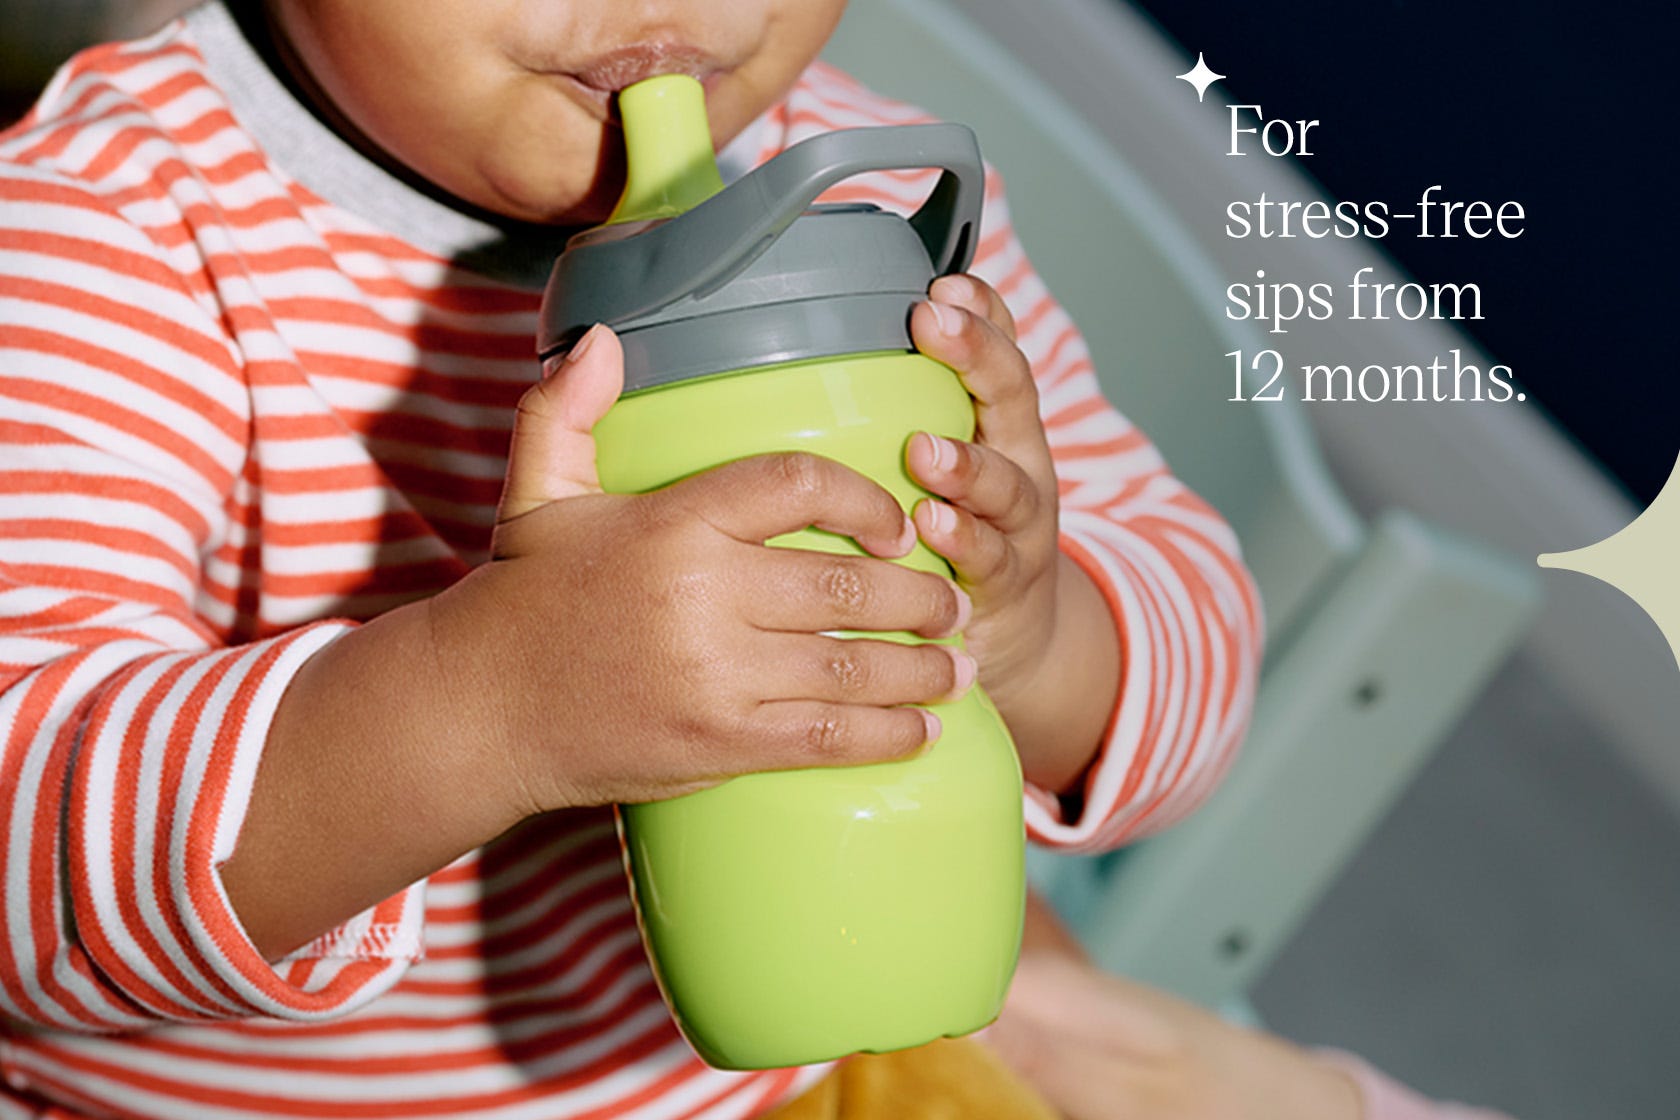 Baby drinking from green Sportee cups with text ' for stress-free sips from 12 months'